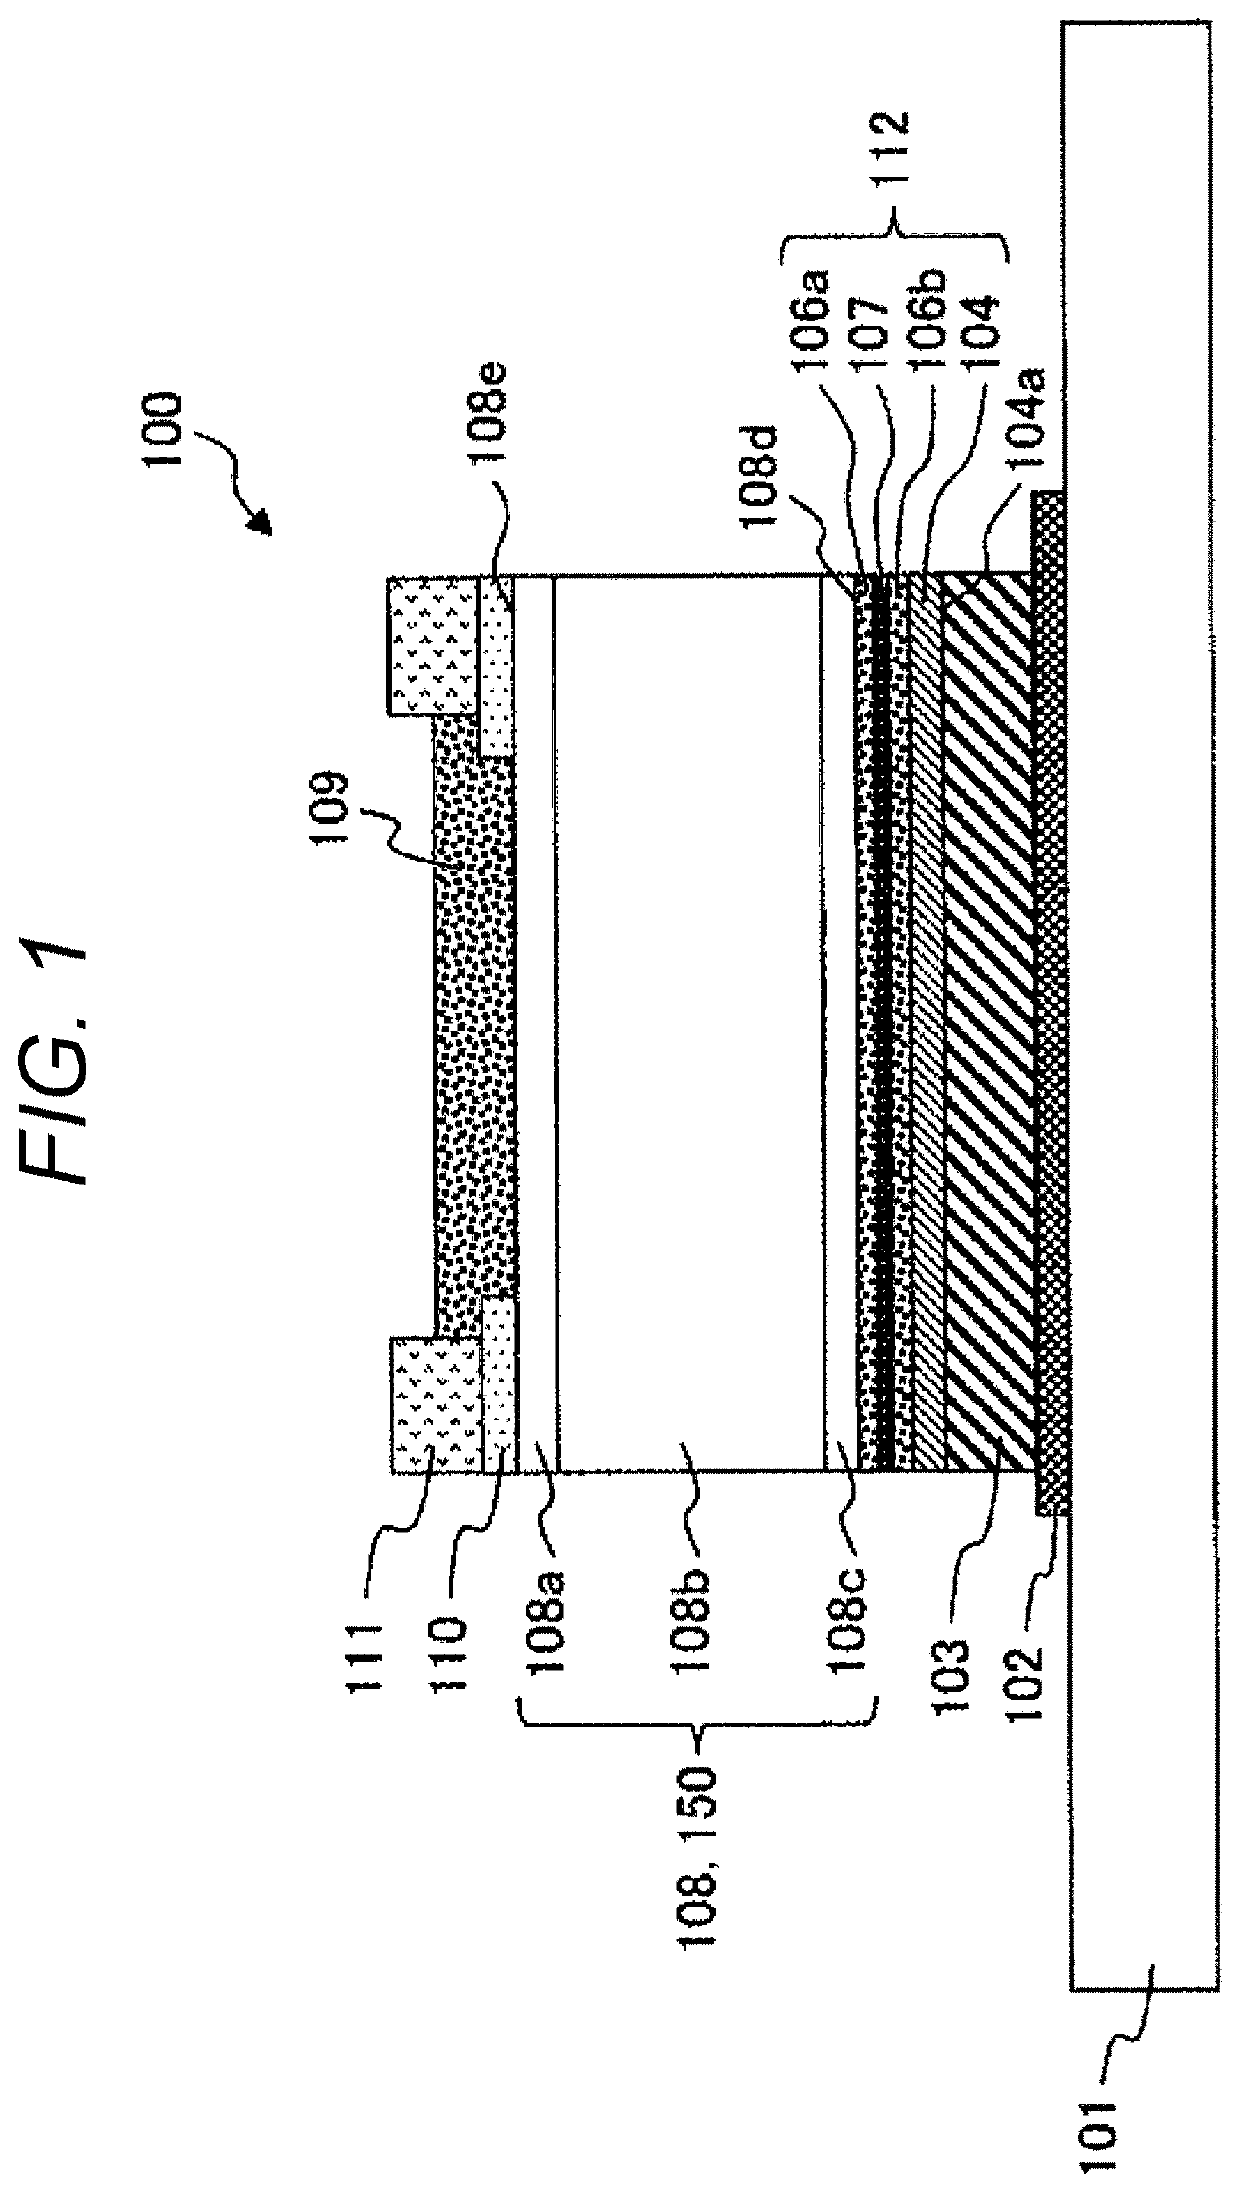 Semiconductor device having a stacked electrode with an electroless nickel plating layer